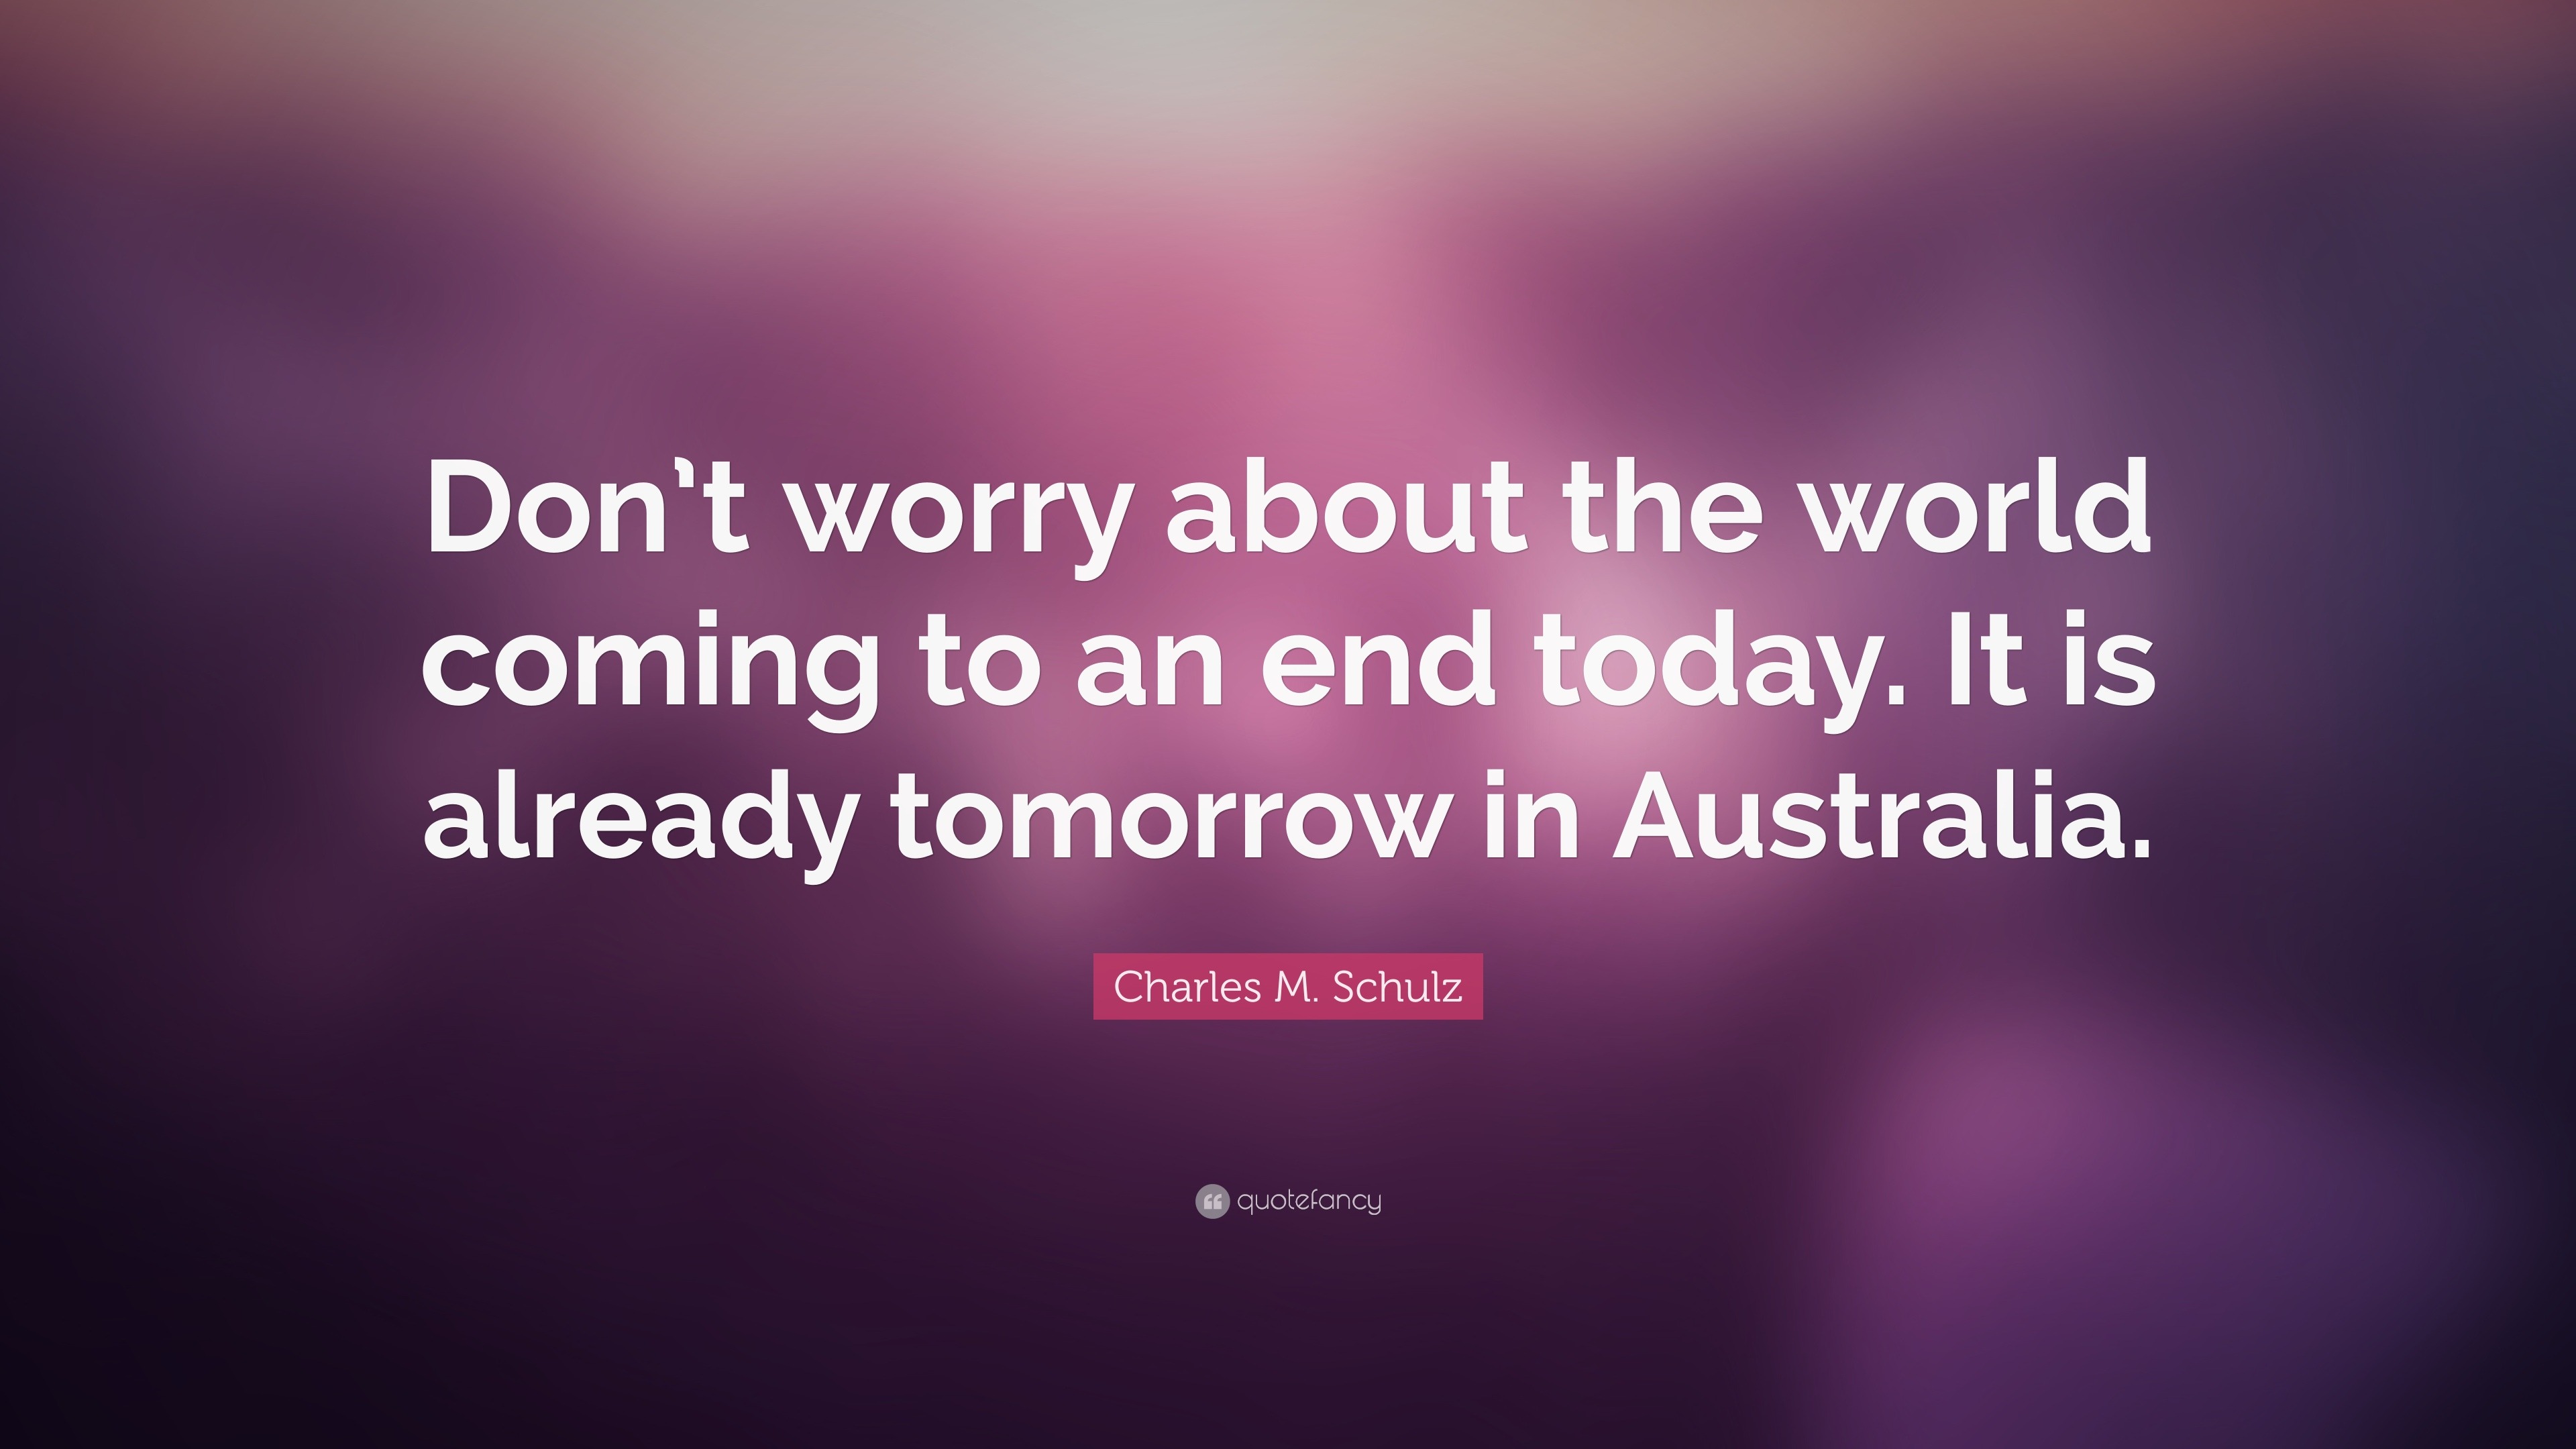 https://quotefancy.com/media/wallpaper/3840x2160/1966545-Charles-M-Schulz-Quote-Don-t-worry-about-the-world-coming-to-an.jpg